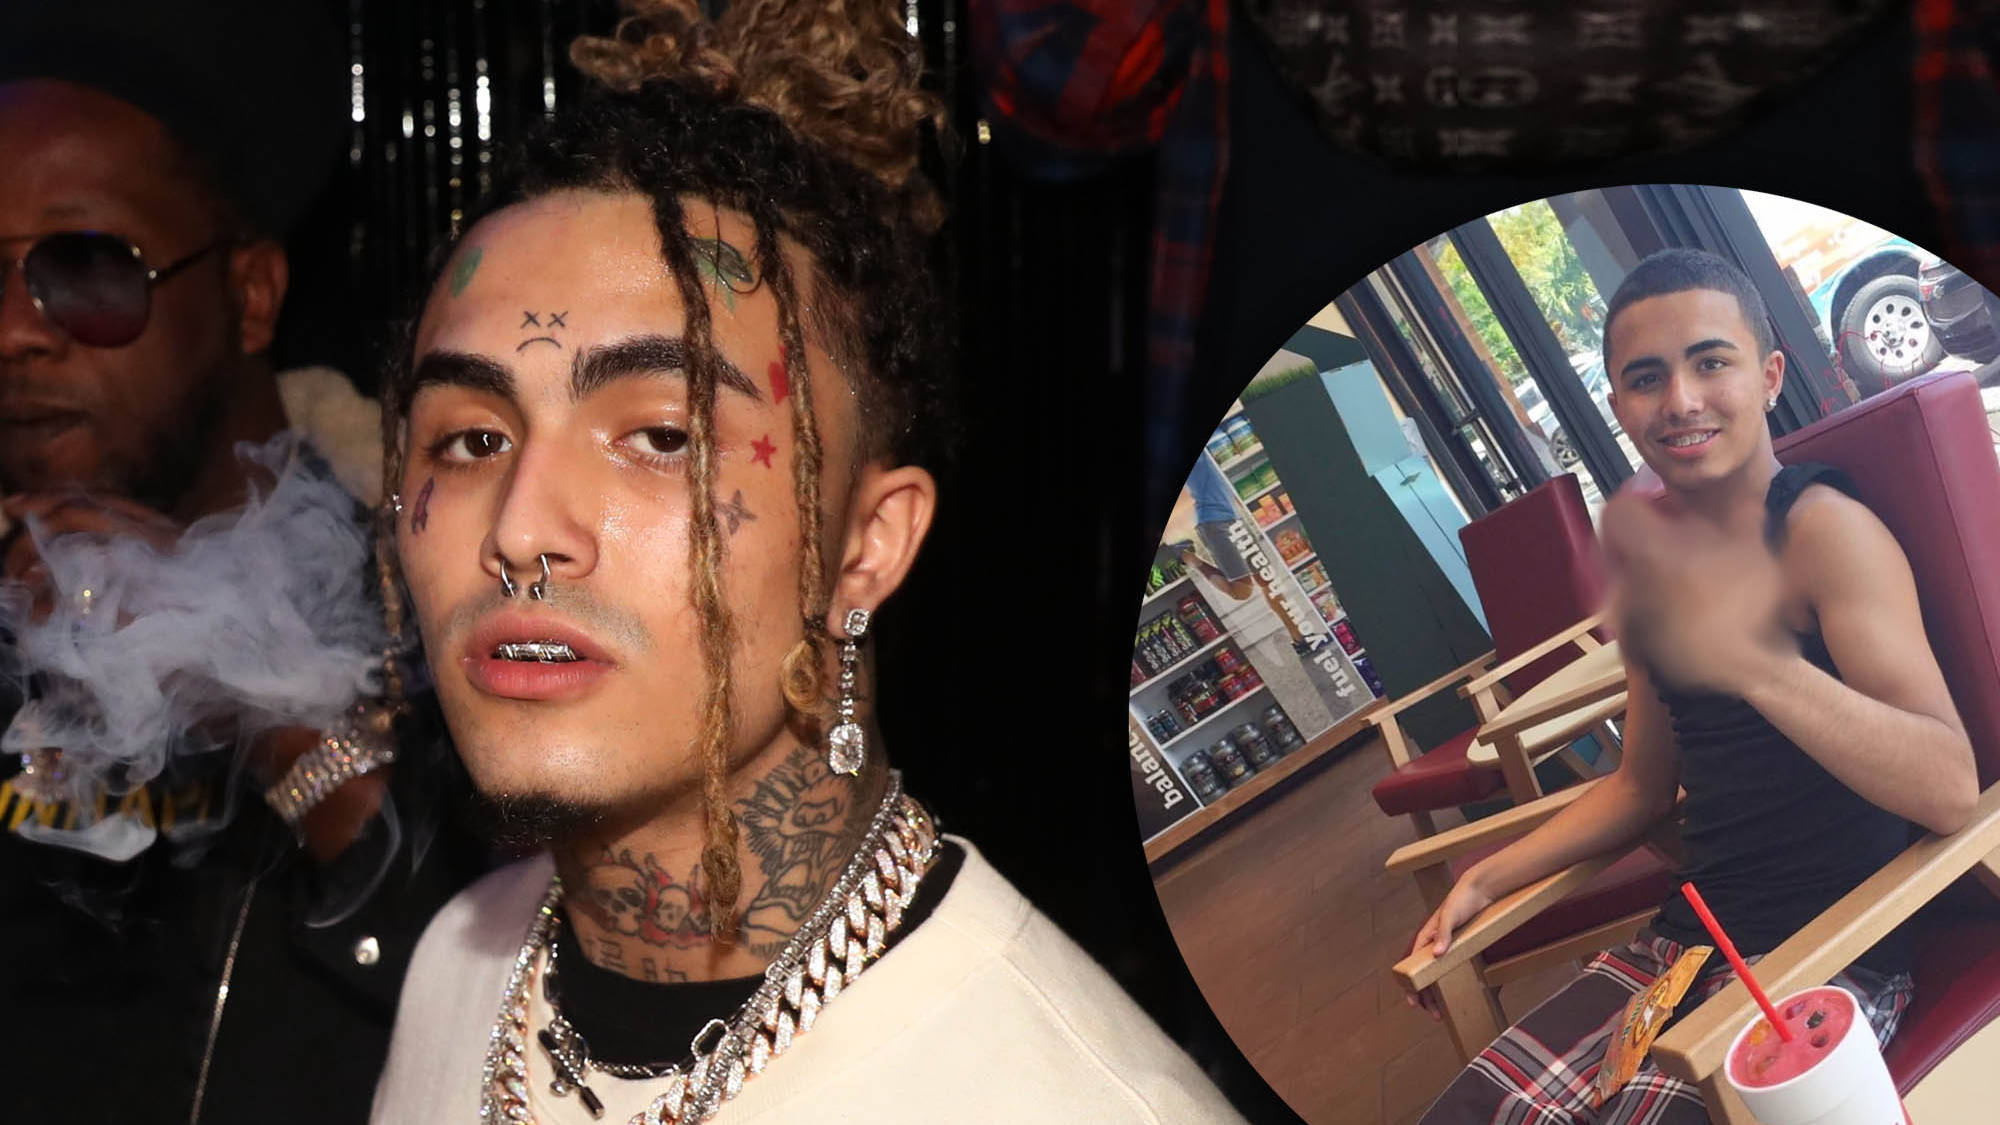 Lil Pump S Face Without Tattoos Revealed In New Instagram Post